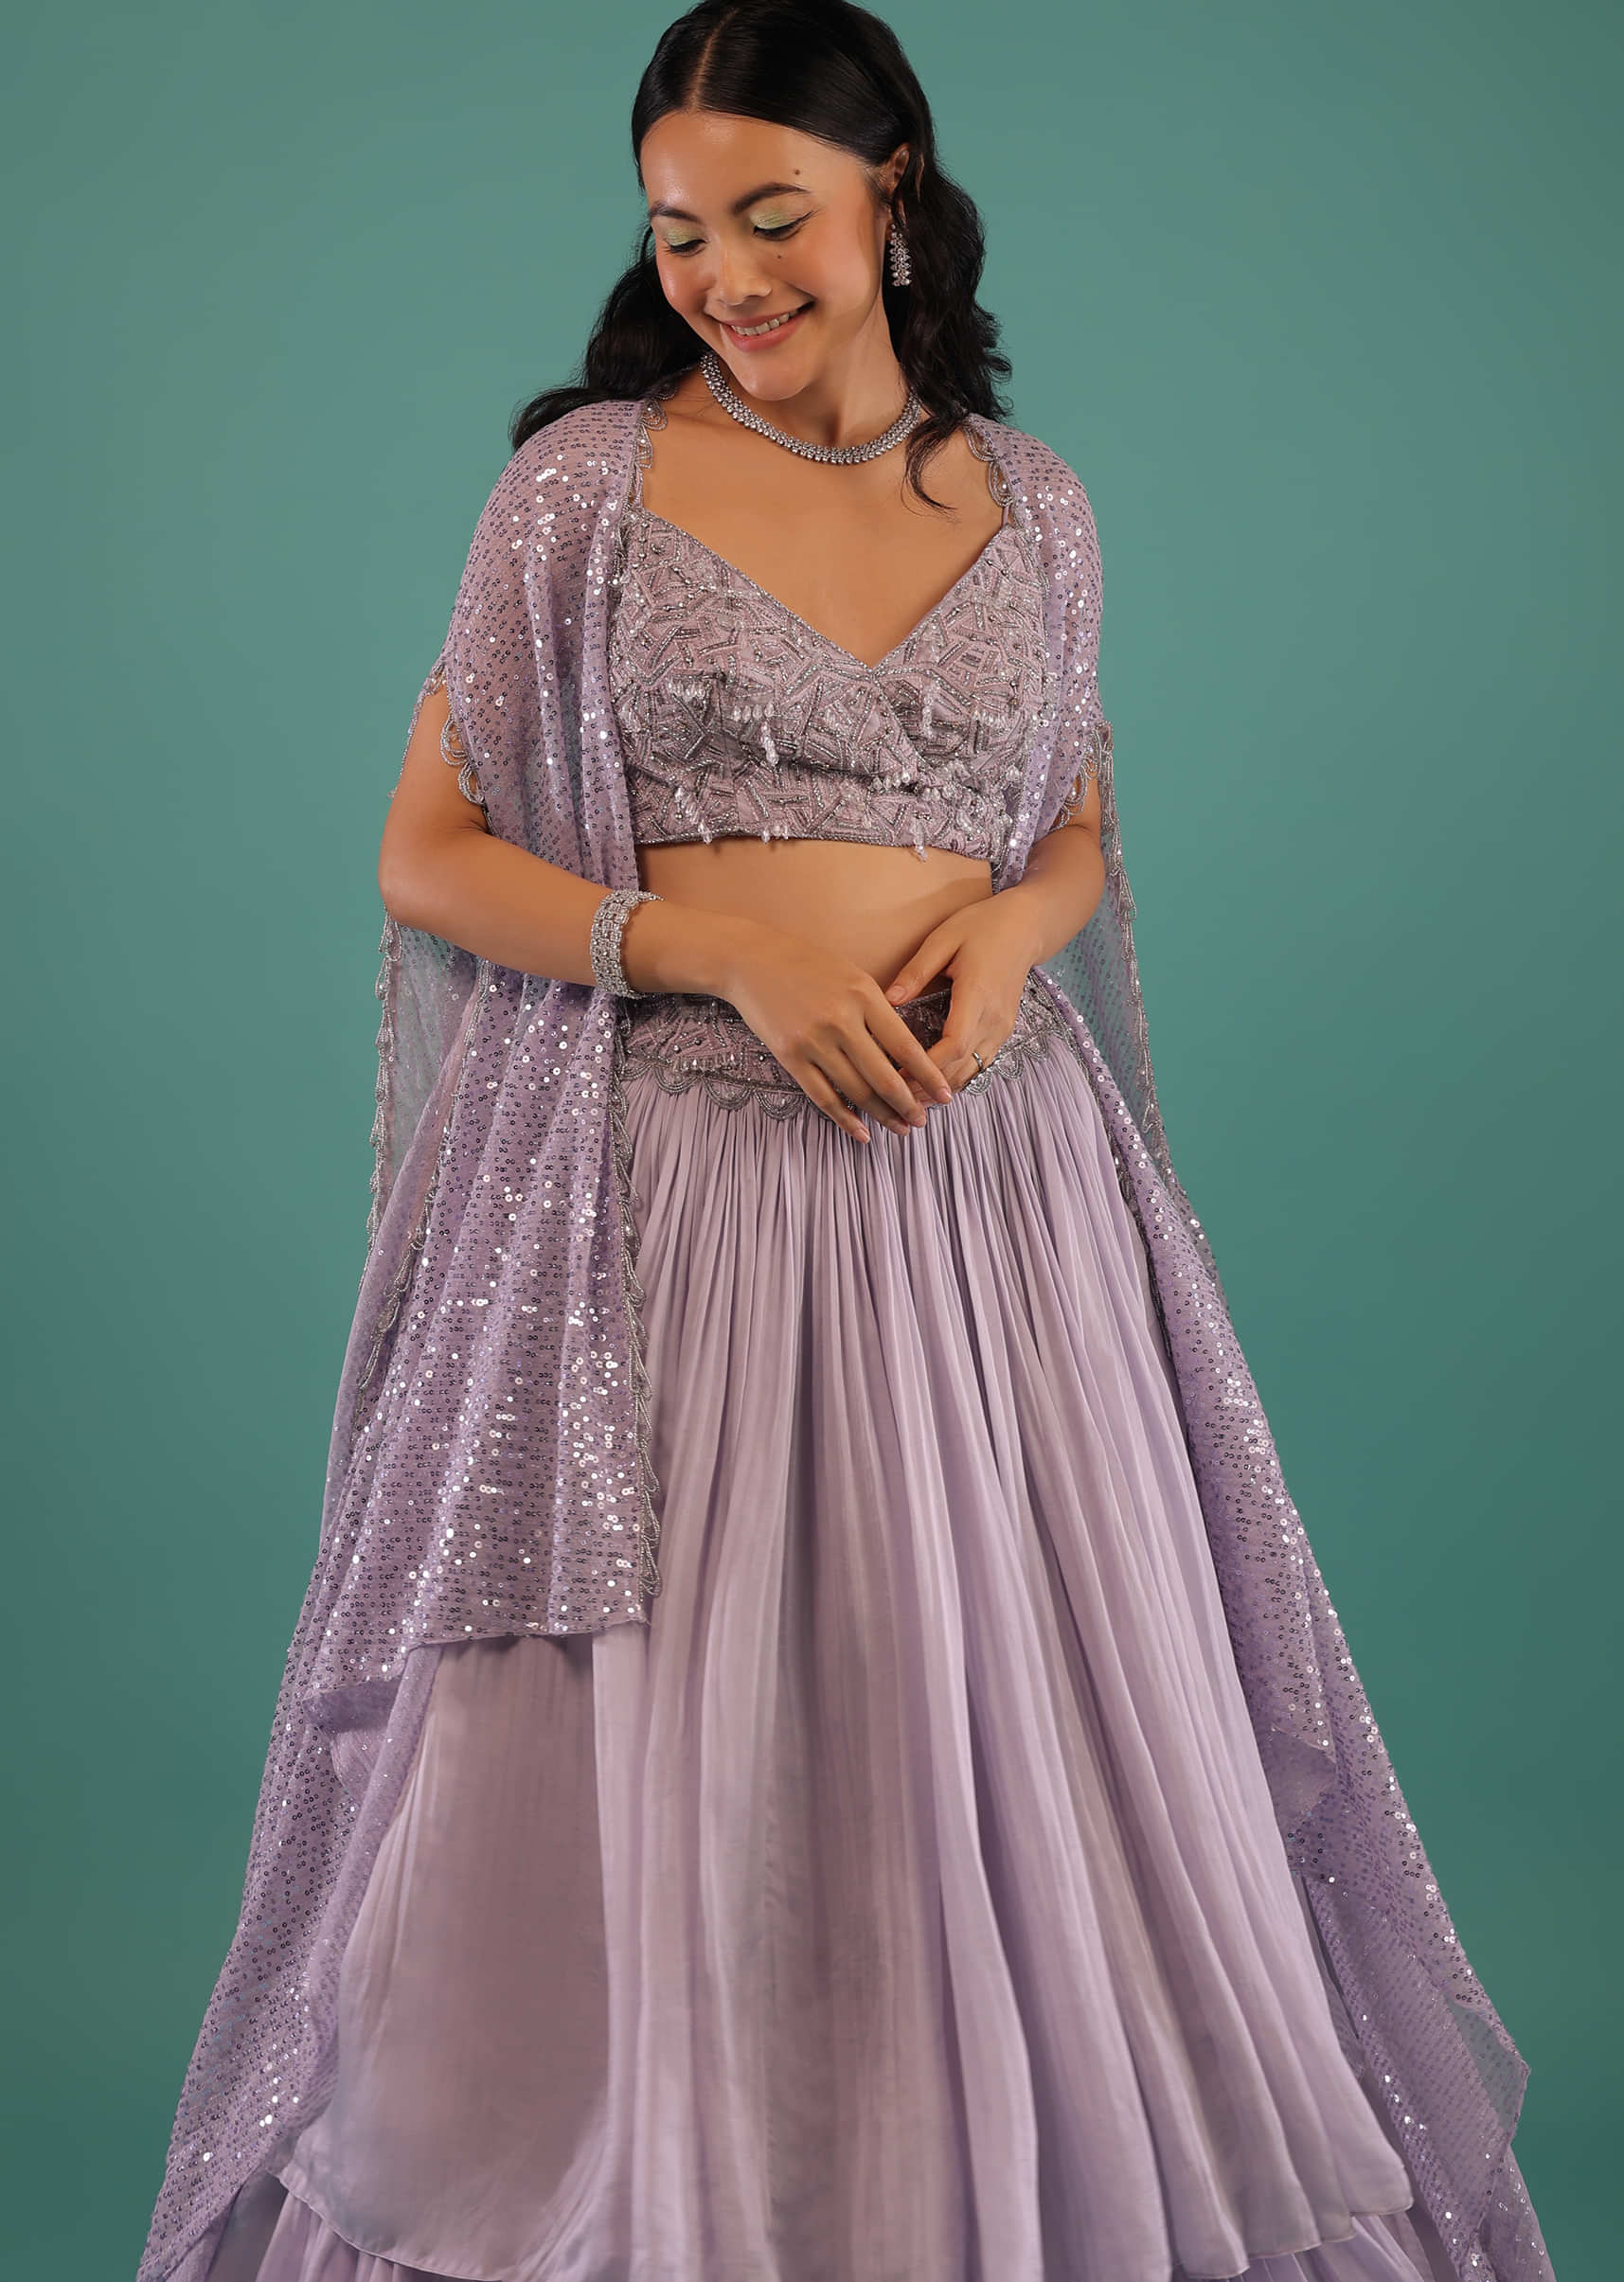 Lavender Layered Skirt With A Resham And 3D Beads Embroidered Crop Top And High Low Sequins Cape